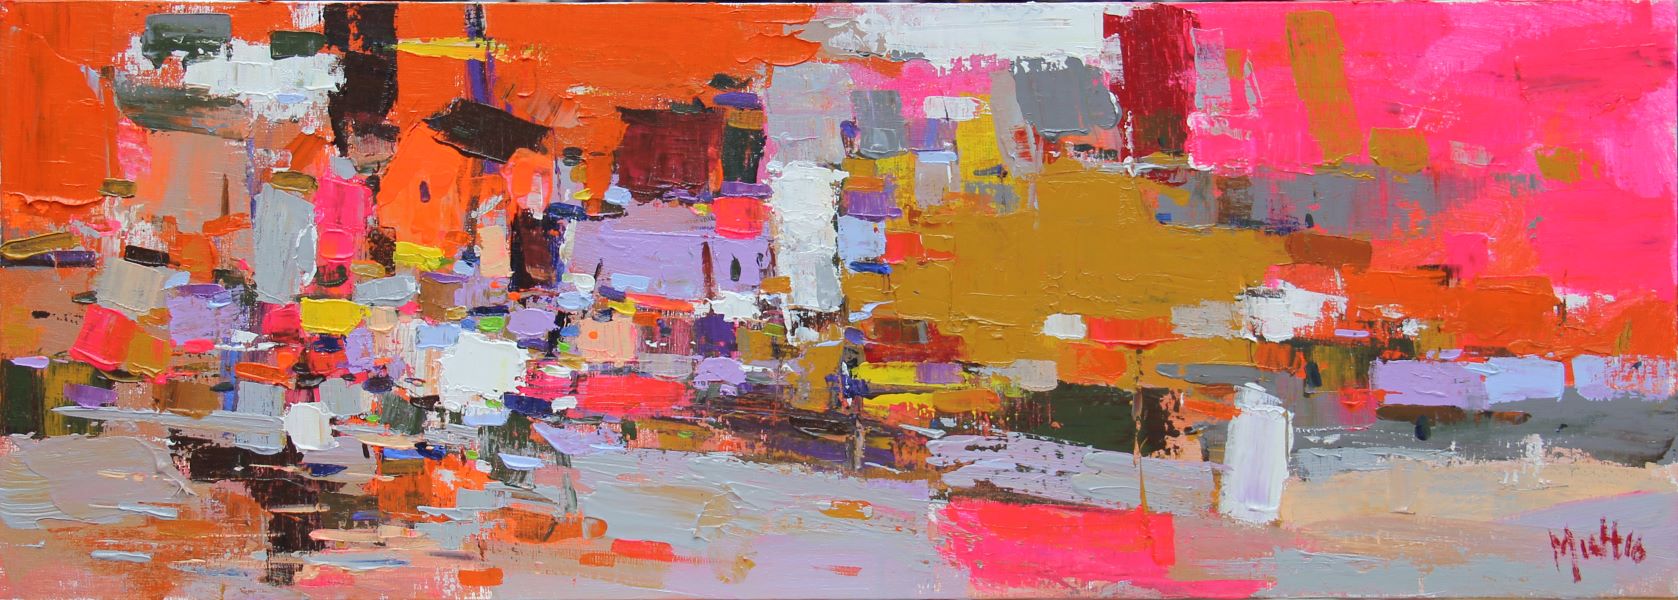 Abstract I - Vietnamese Oil Paintings by Artist Pham Hoang Minh